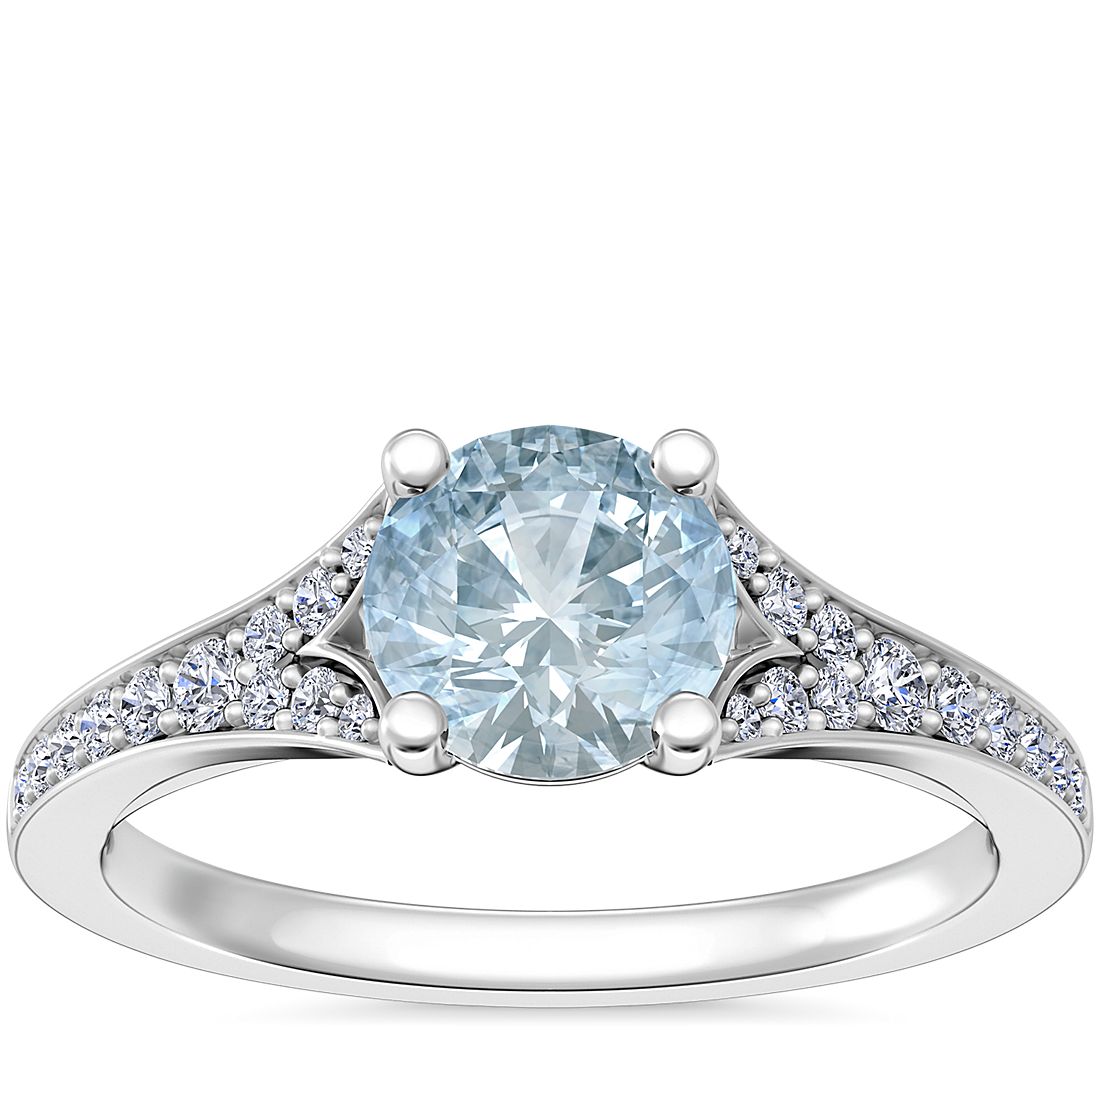 Petite Split Shank Pavé Cathedral Engagement Ring with Round Aquamarine in Platinum (6.5mm)